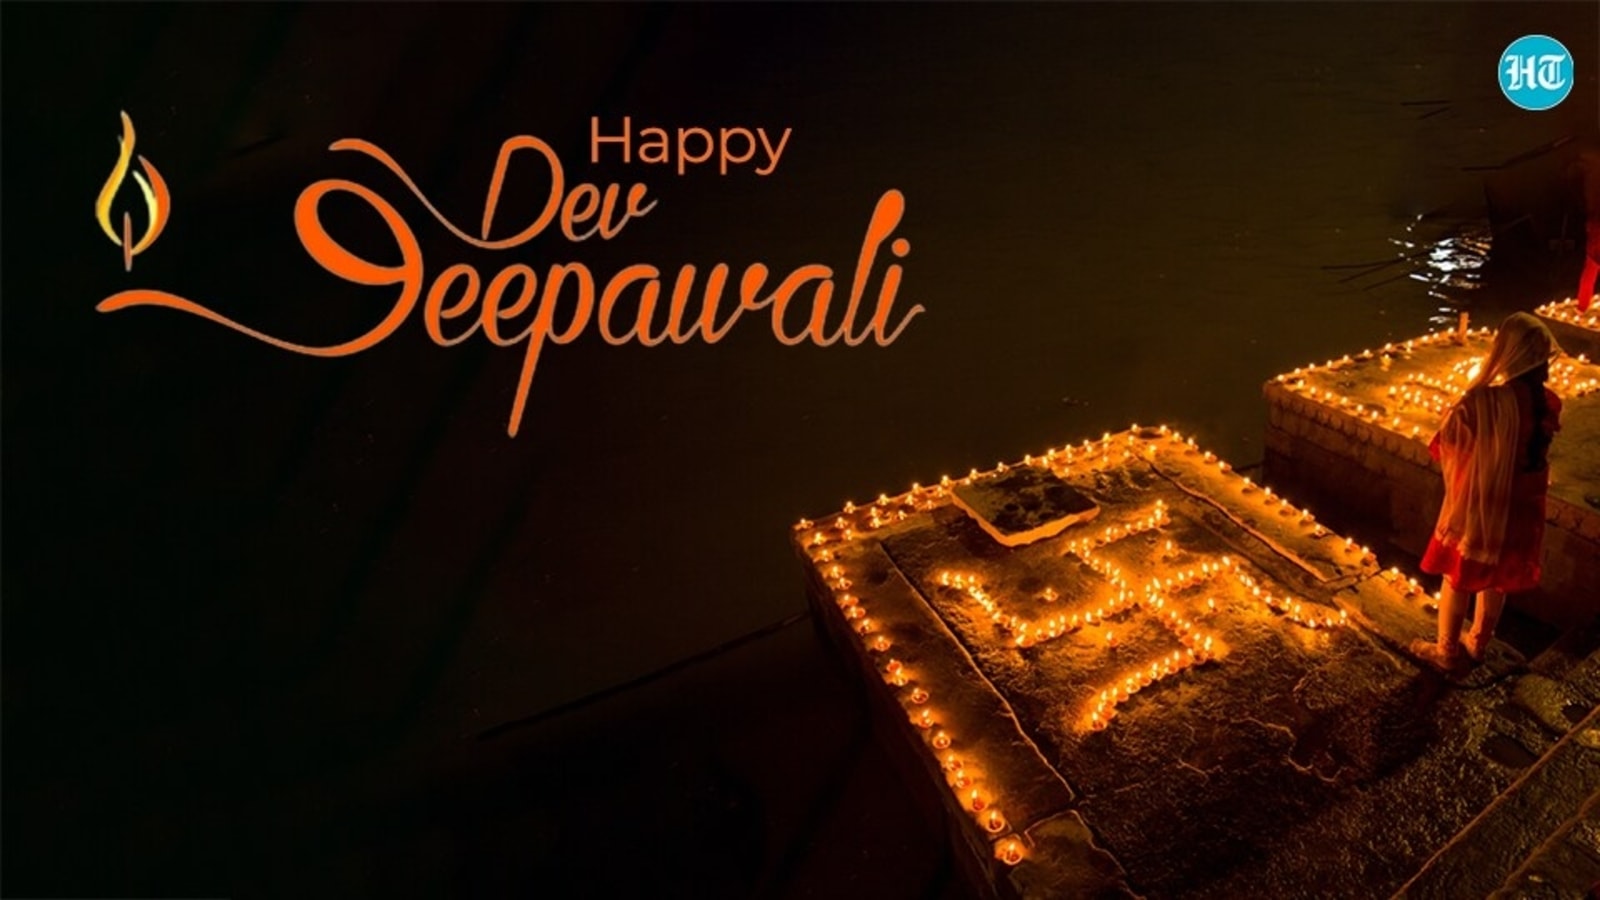 dev-deepawali-2022-wishes-messages-images-to-share-with-loved-ones